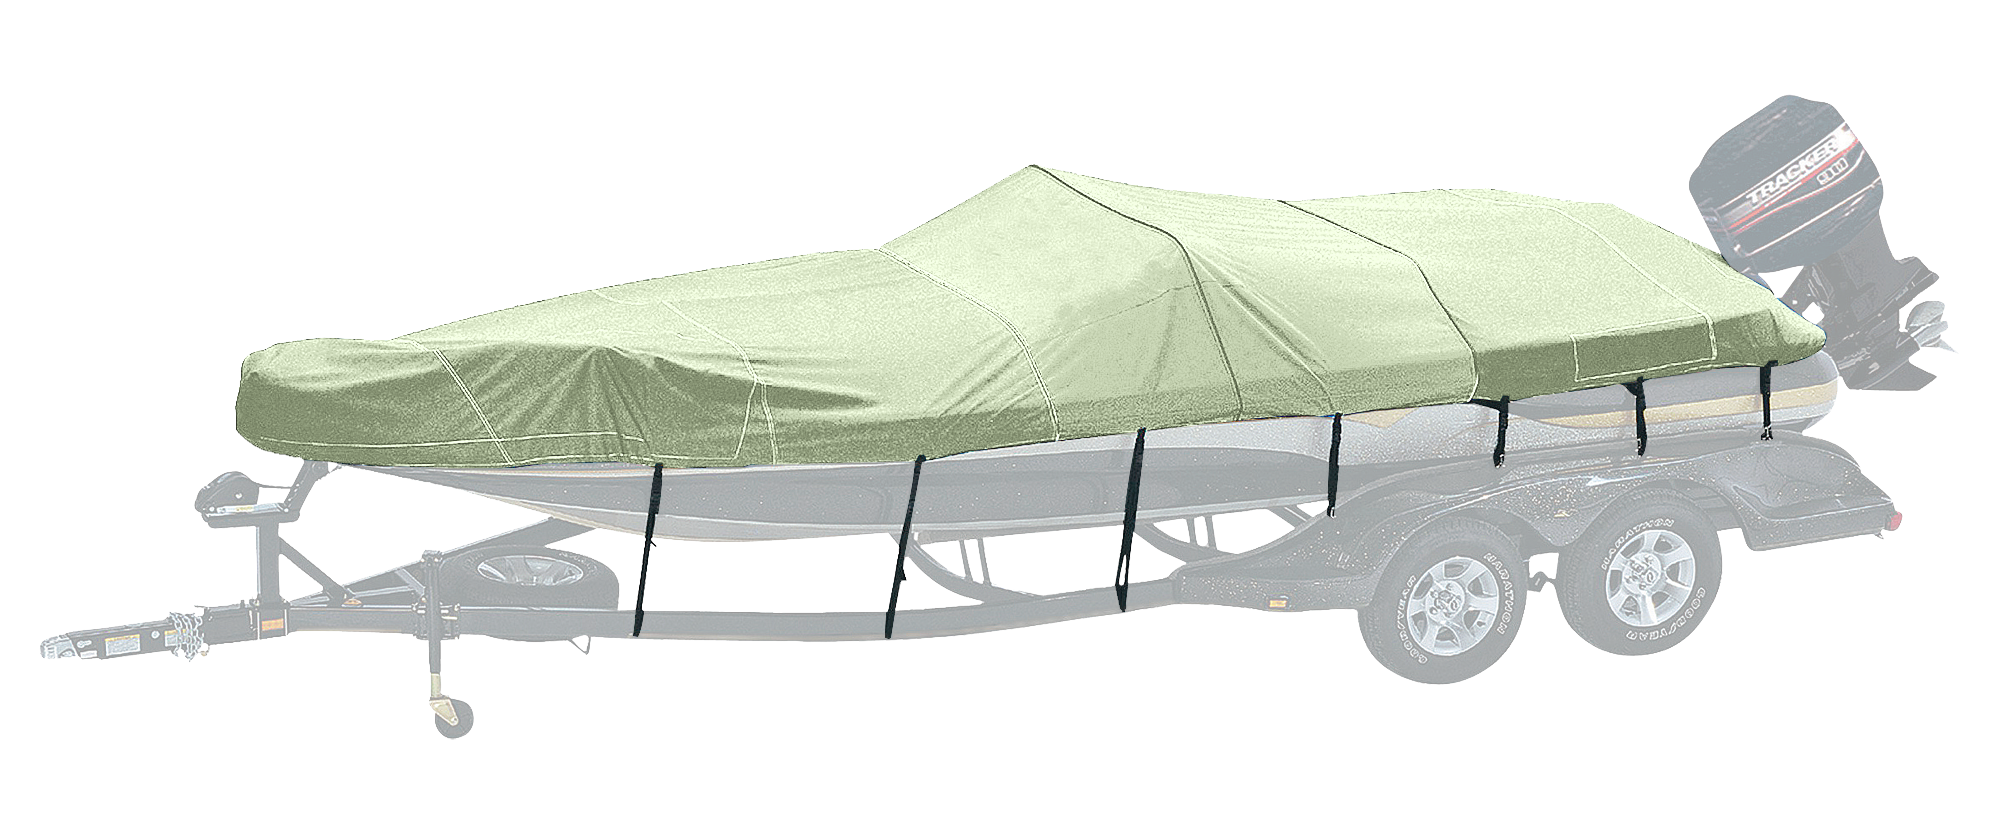 Bass Pro Shops Exact Fit Boat Cover by Westland - Tahoe Boats - 2005 204 Deckboat I/O - Linen